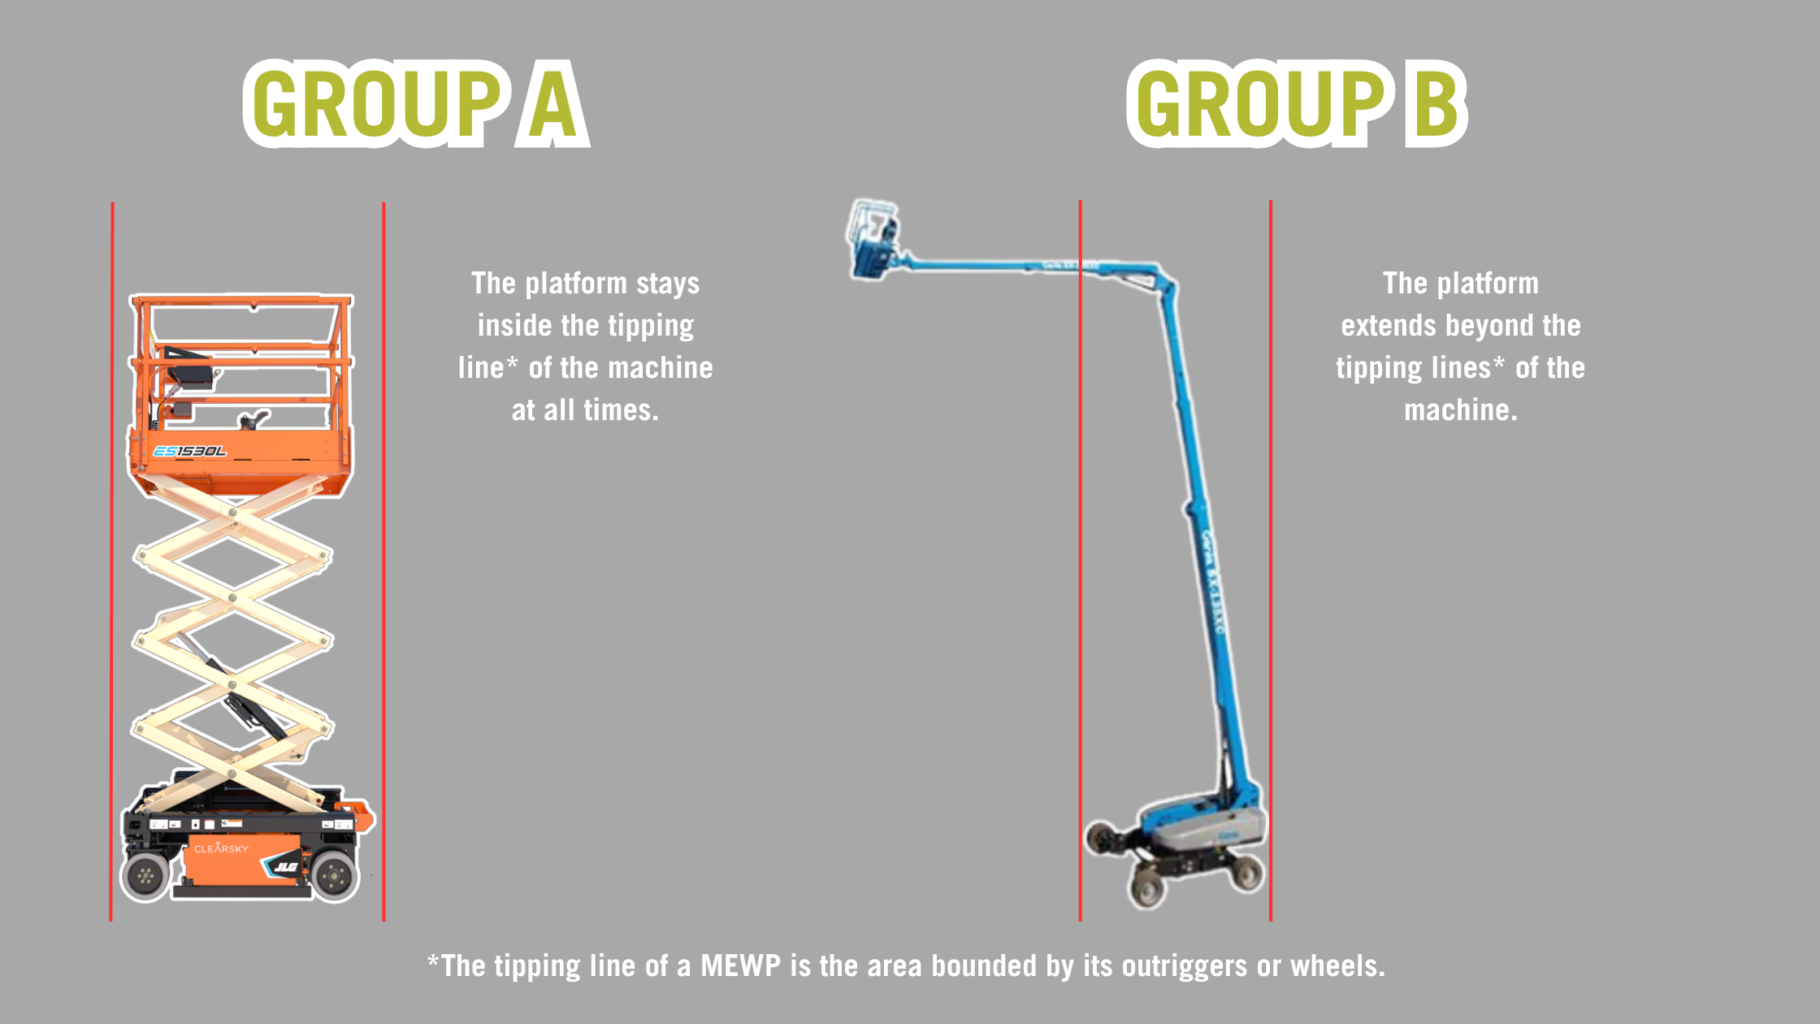 group a: the platform stays inside the tipping line of the machine at all times. group b: the platform extends beyond the tipping line of the machine. the tipping line of a MEWP is the area bounded by its outriggers or wheels. 